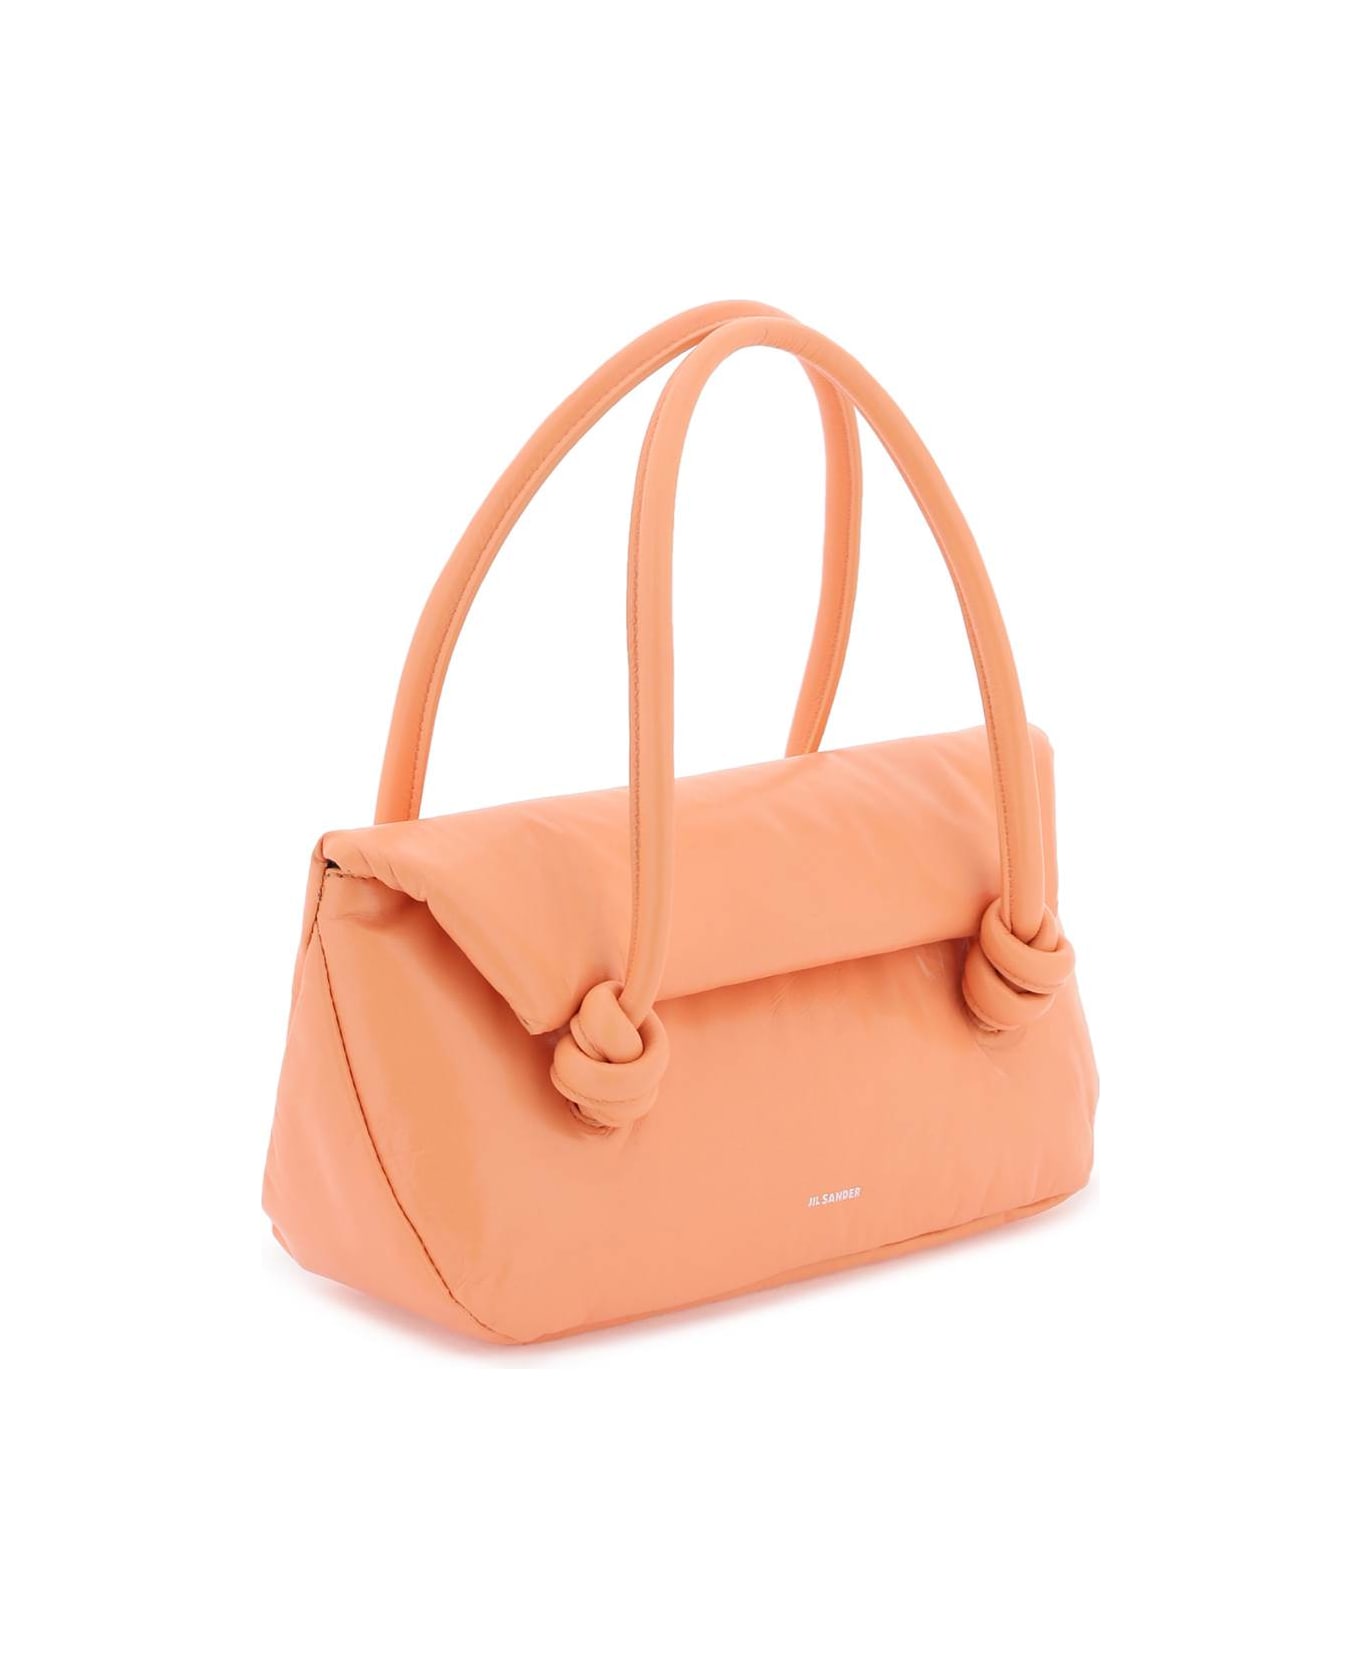 Jil Sander Patent Leather Small Shoulder Bag - PEACH PEARL (Pink) トートバッグ